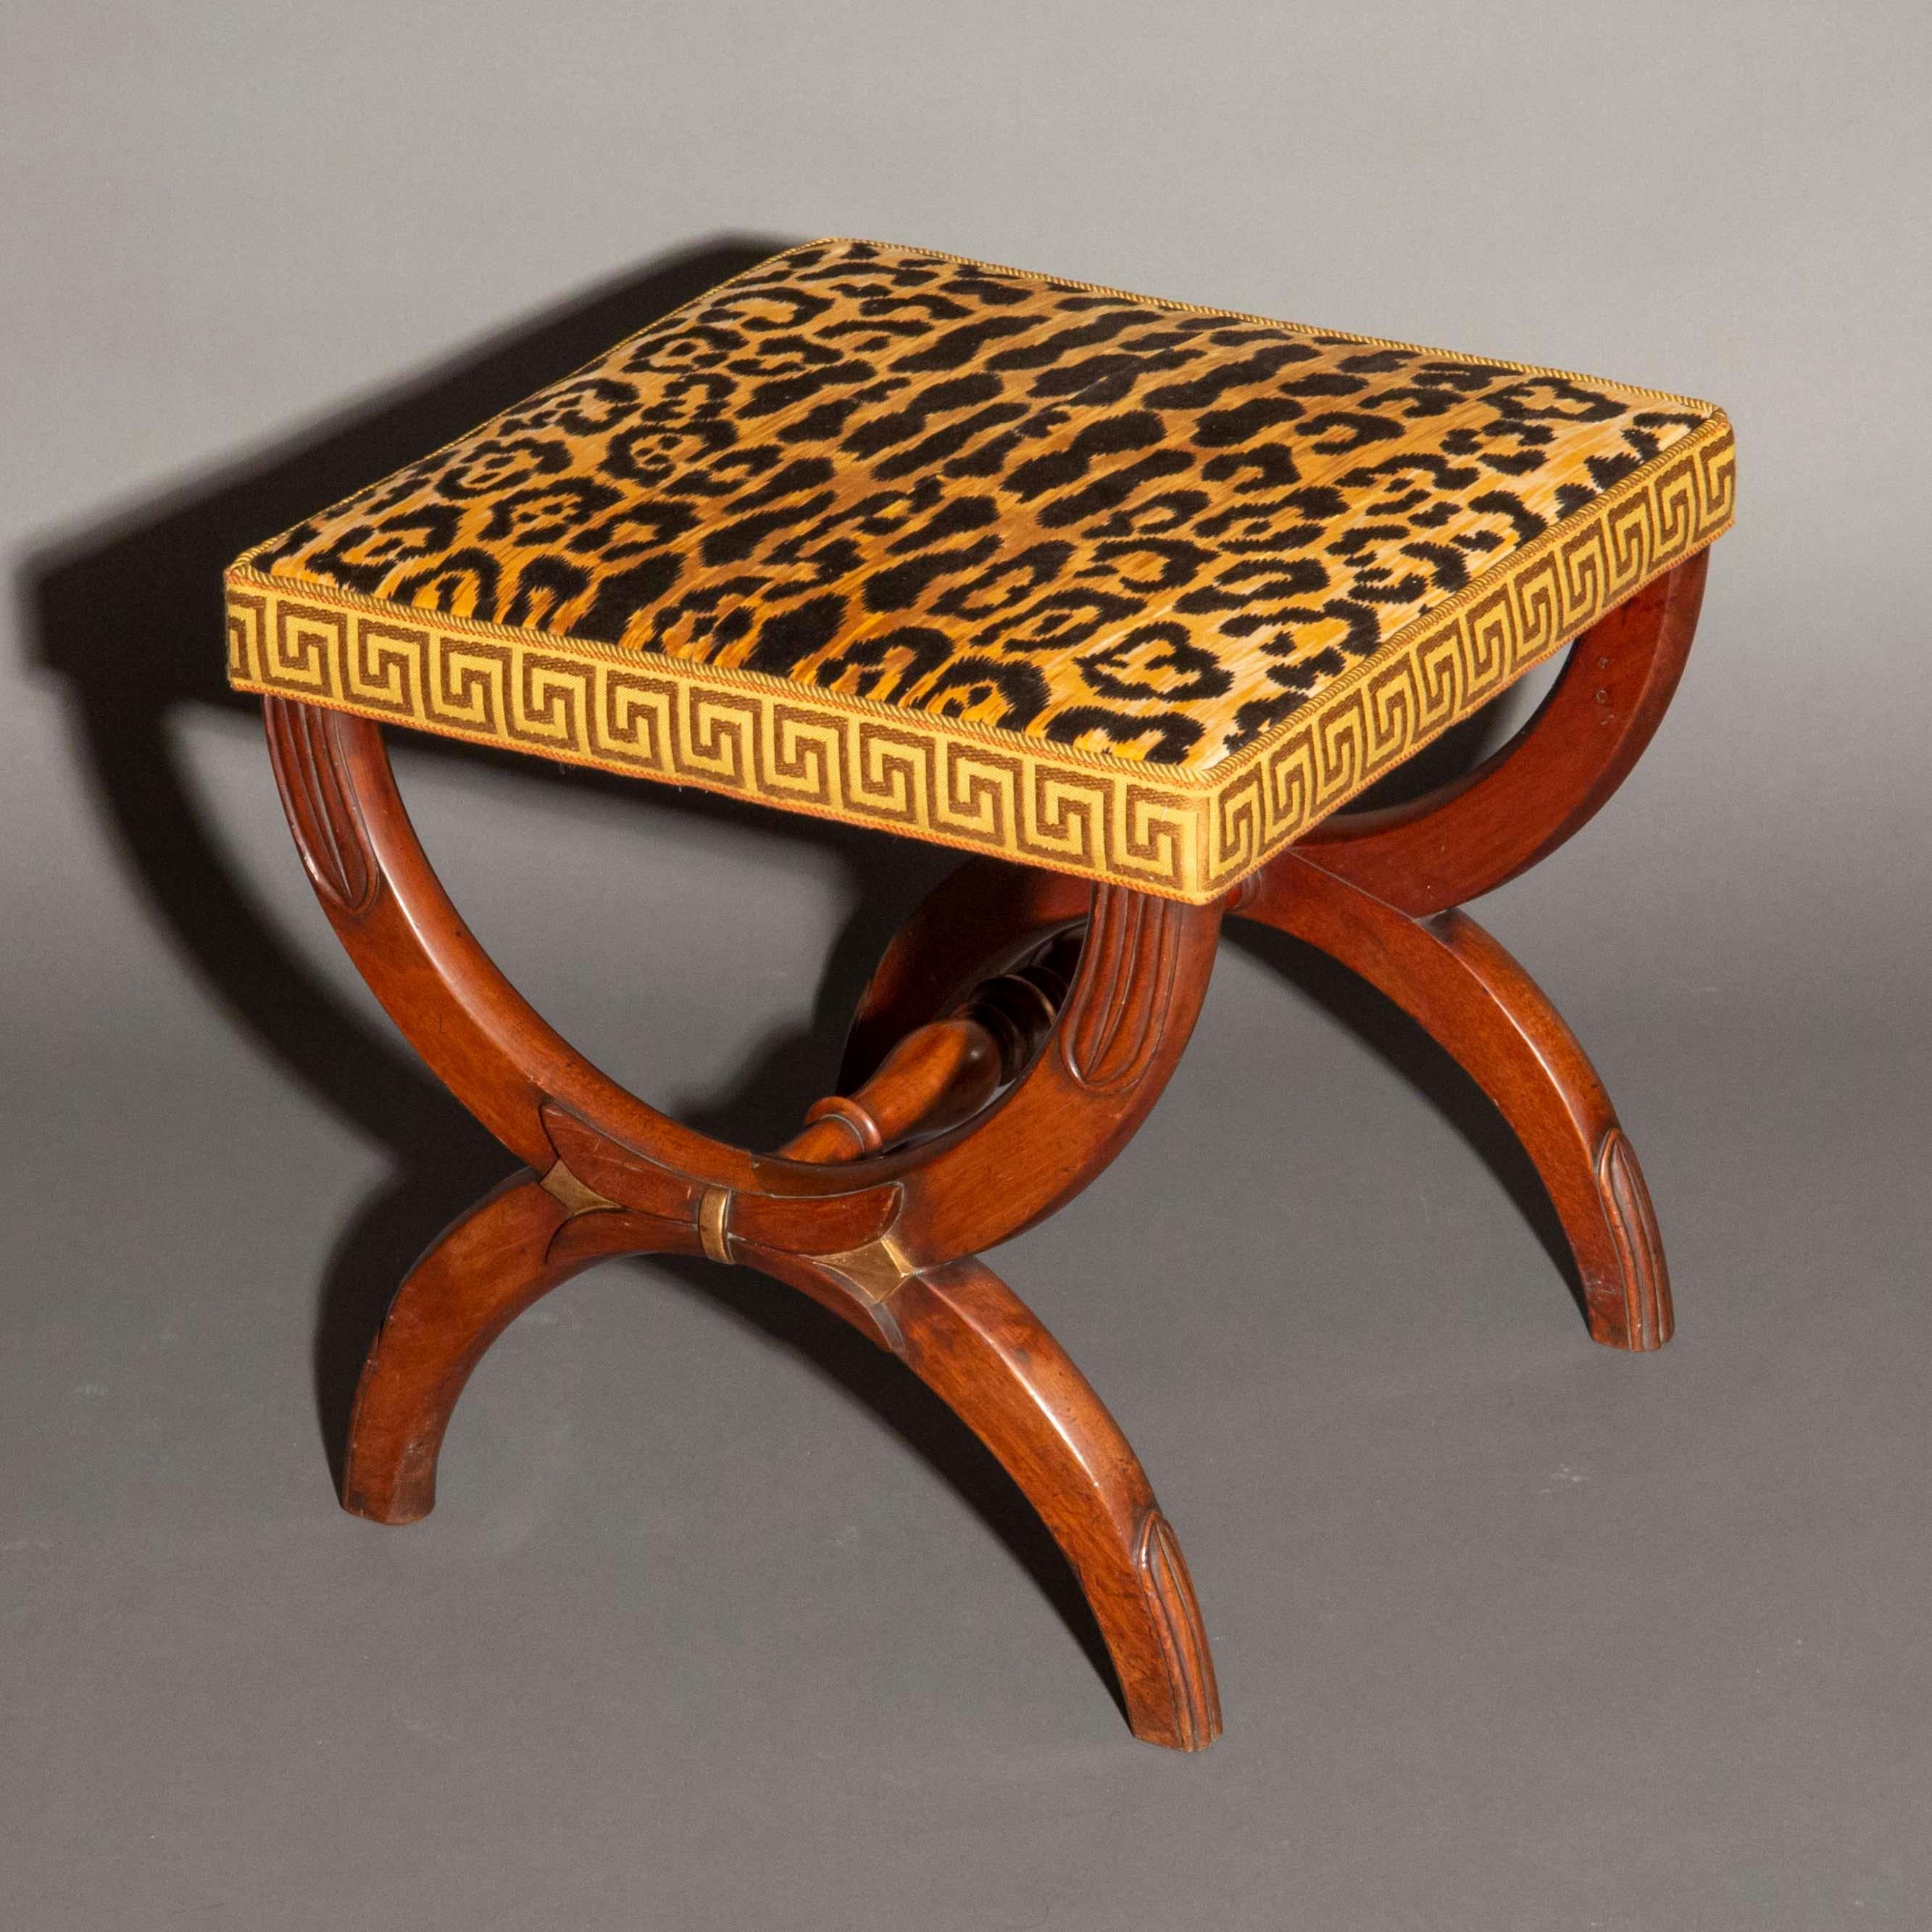 British Antique Curule Stool in Leopard Print and Greek Key Border For Sale